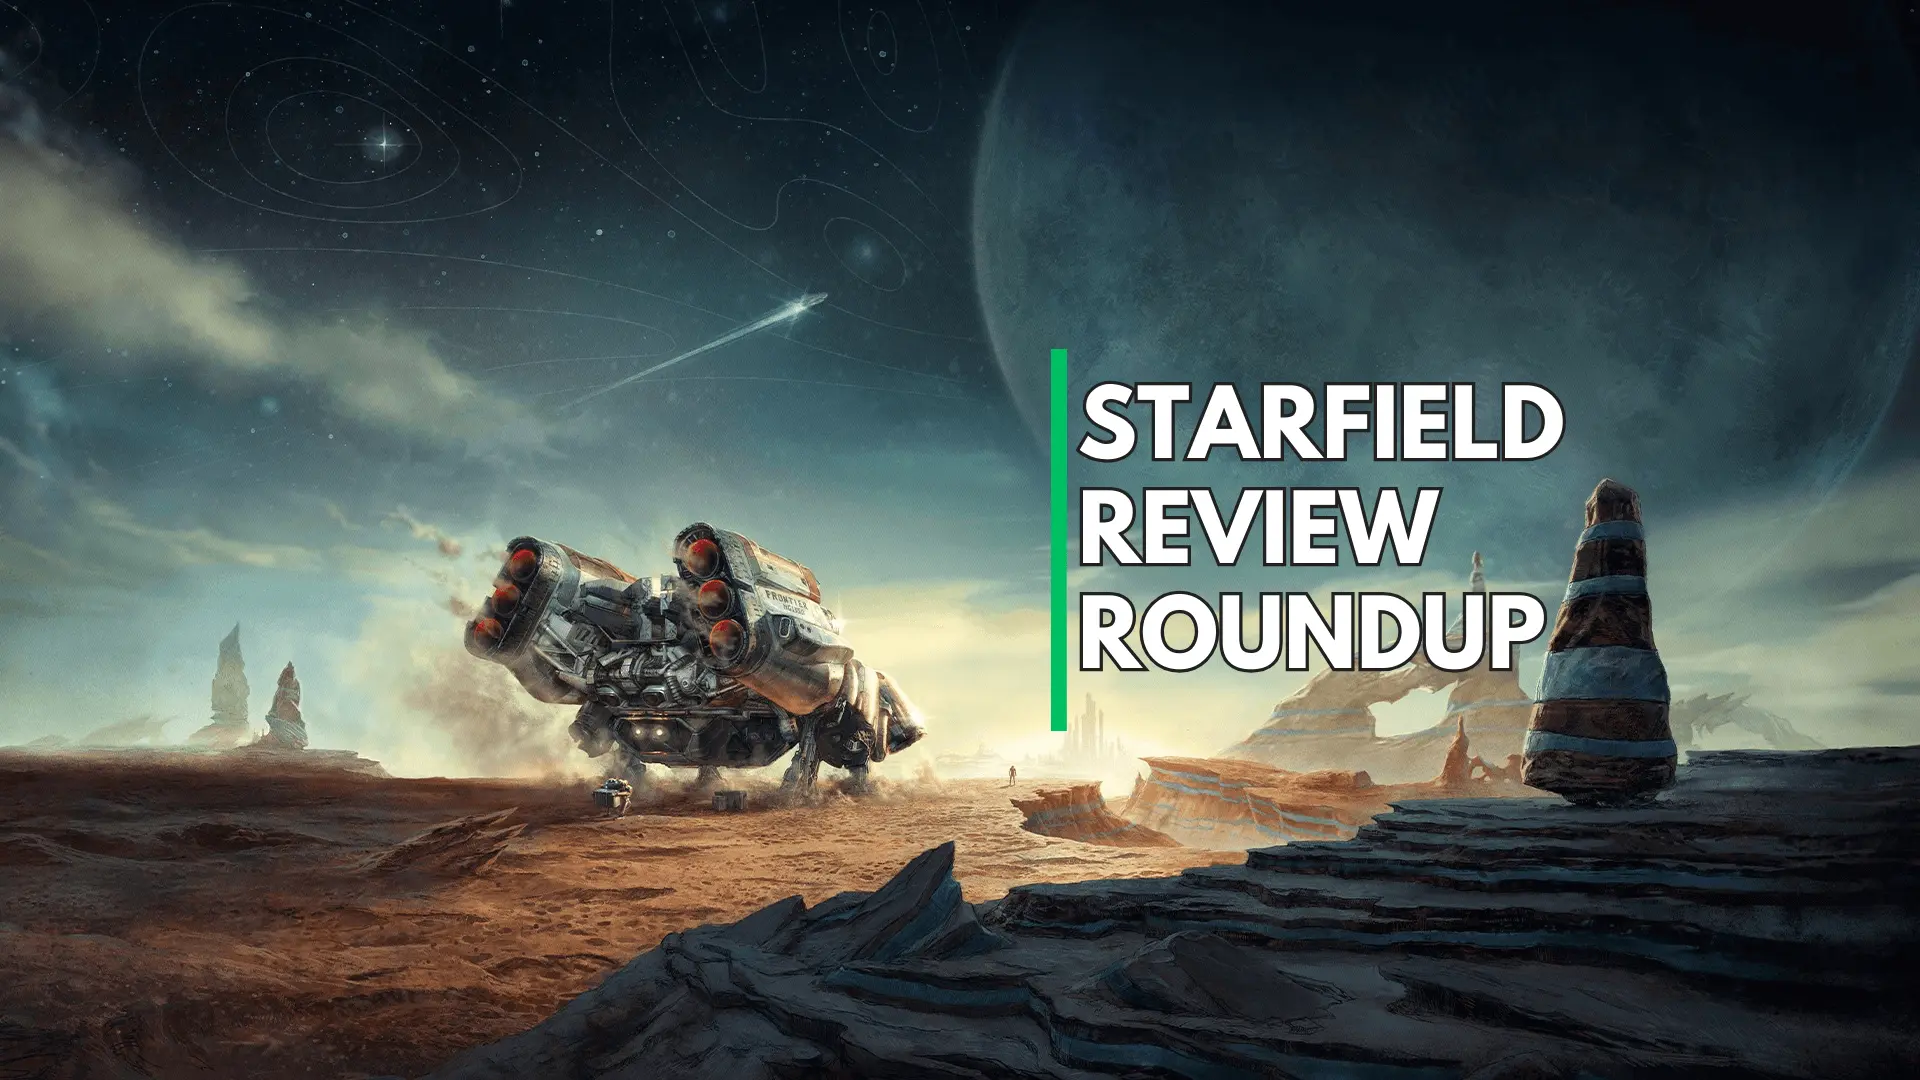 Starfield Review Roundup: Mostly positive with some slight disappointments